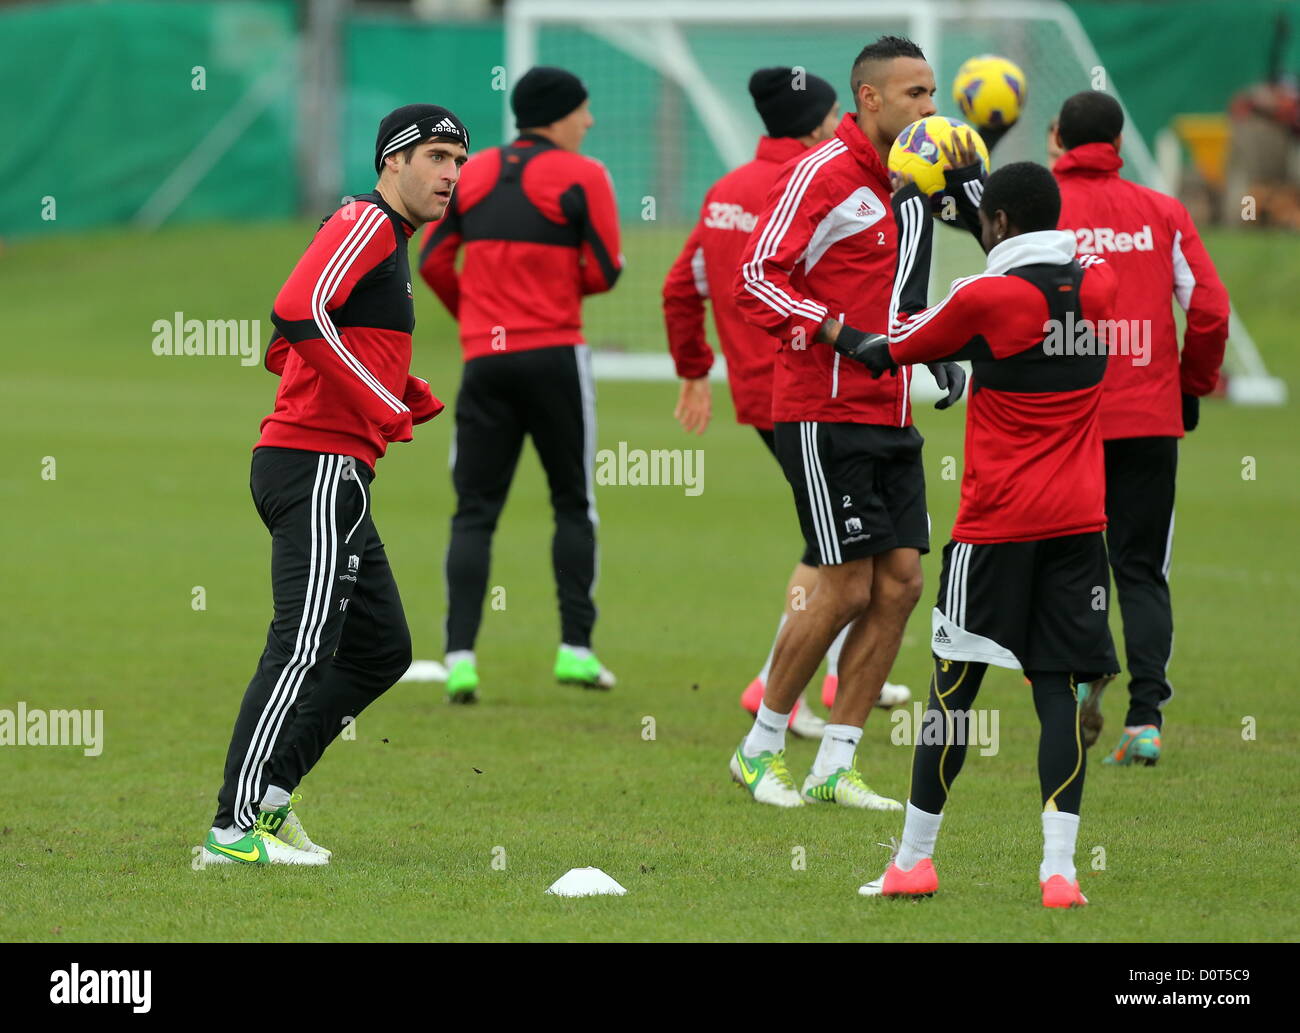 Wales, UK. Friday, 30 November 2012  Pictured L-R: Danny Graham and Nathan Dyer   Re: Swansea City FC, training at the Llandarcy training ground in south Wales. Stock Photo